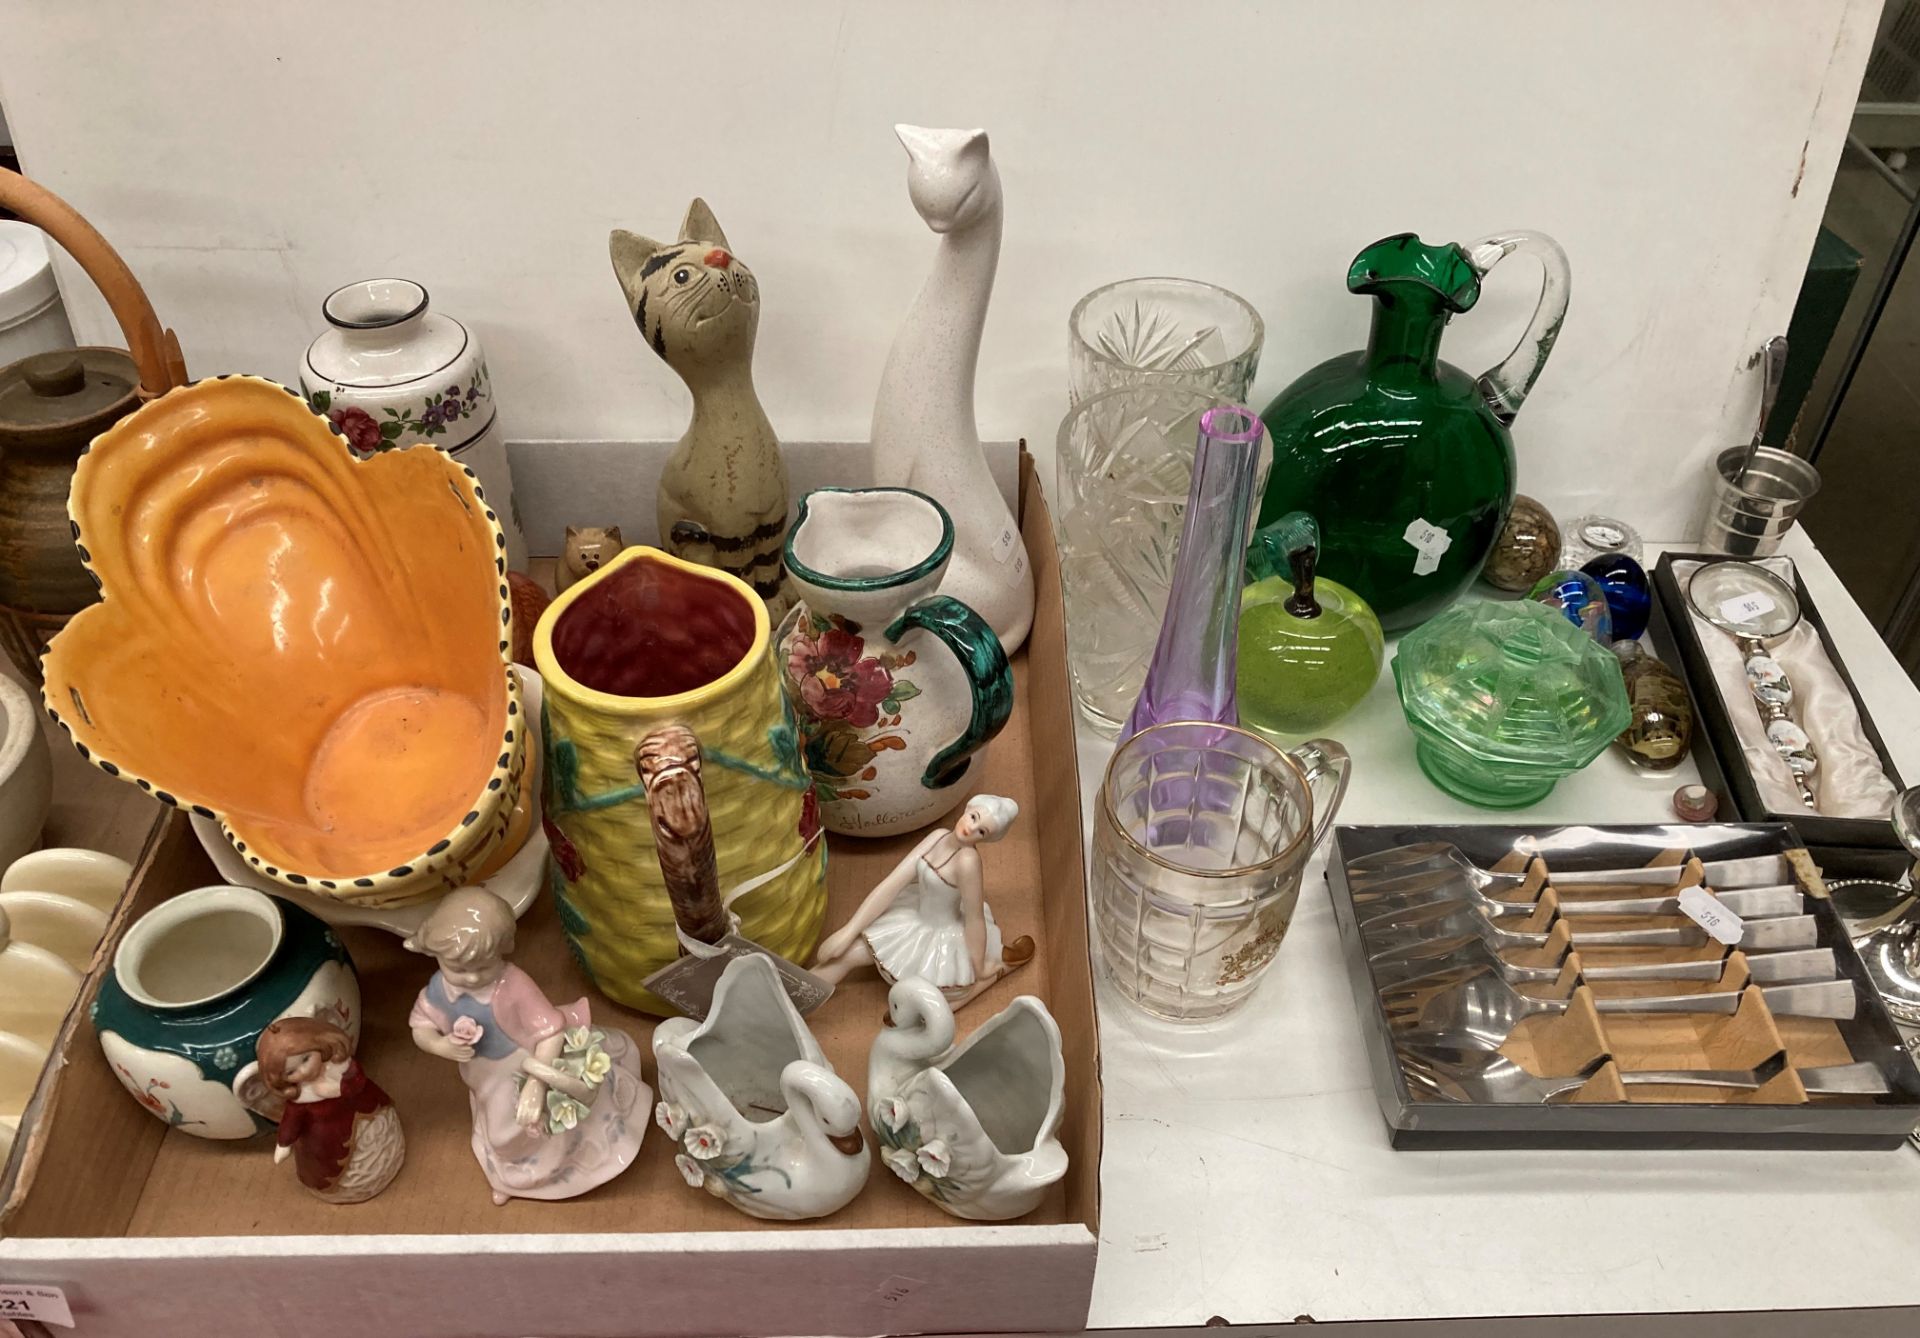 Contents to three box lids and corner of table - assorted ornaments, glassware, - Image 2 of 4